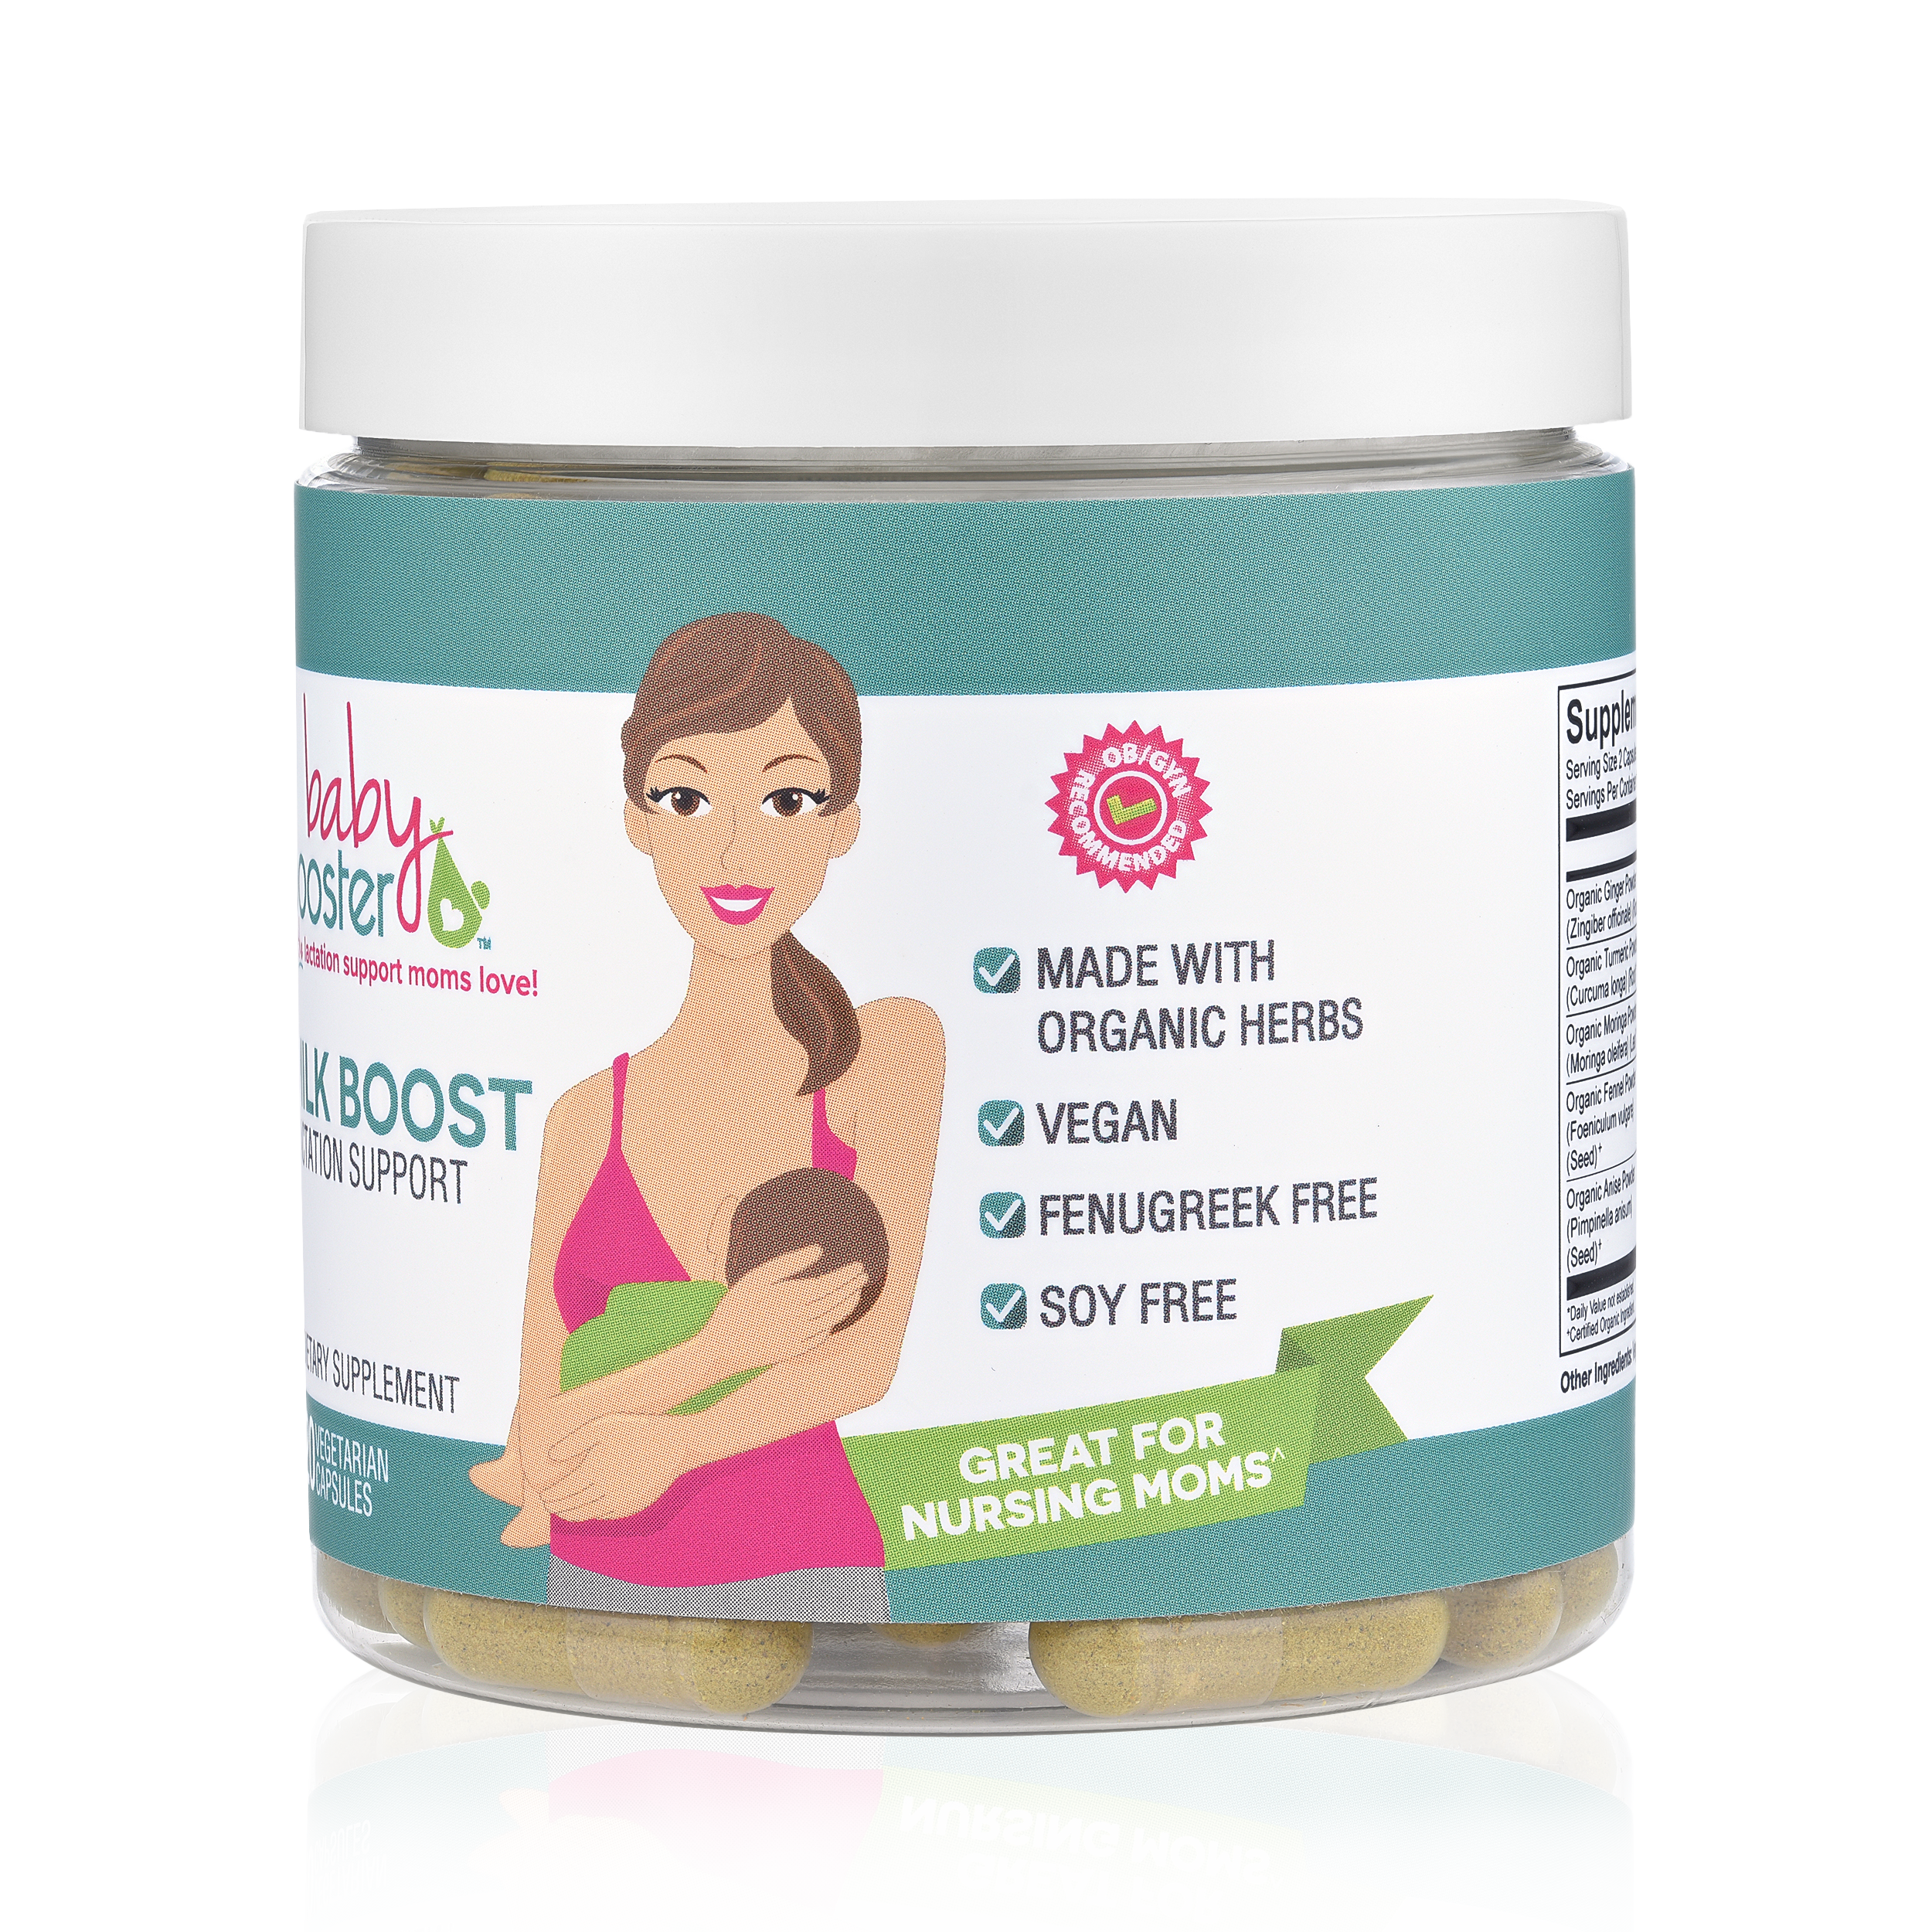 Milk Boost - Lactation Support